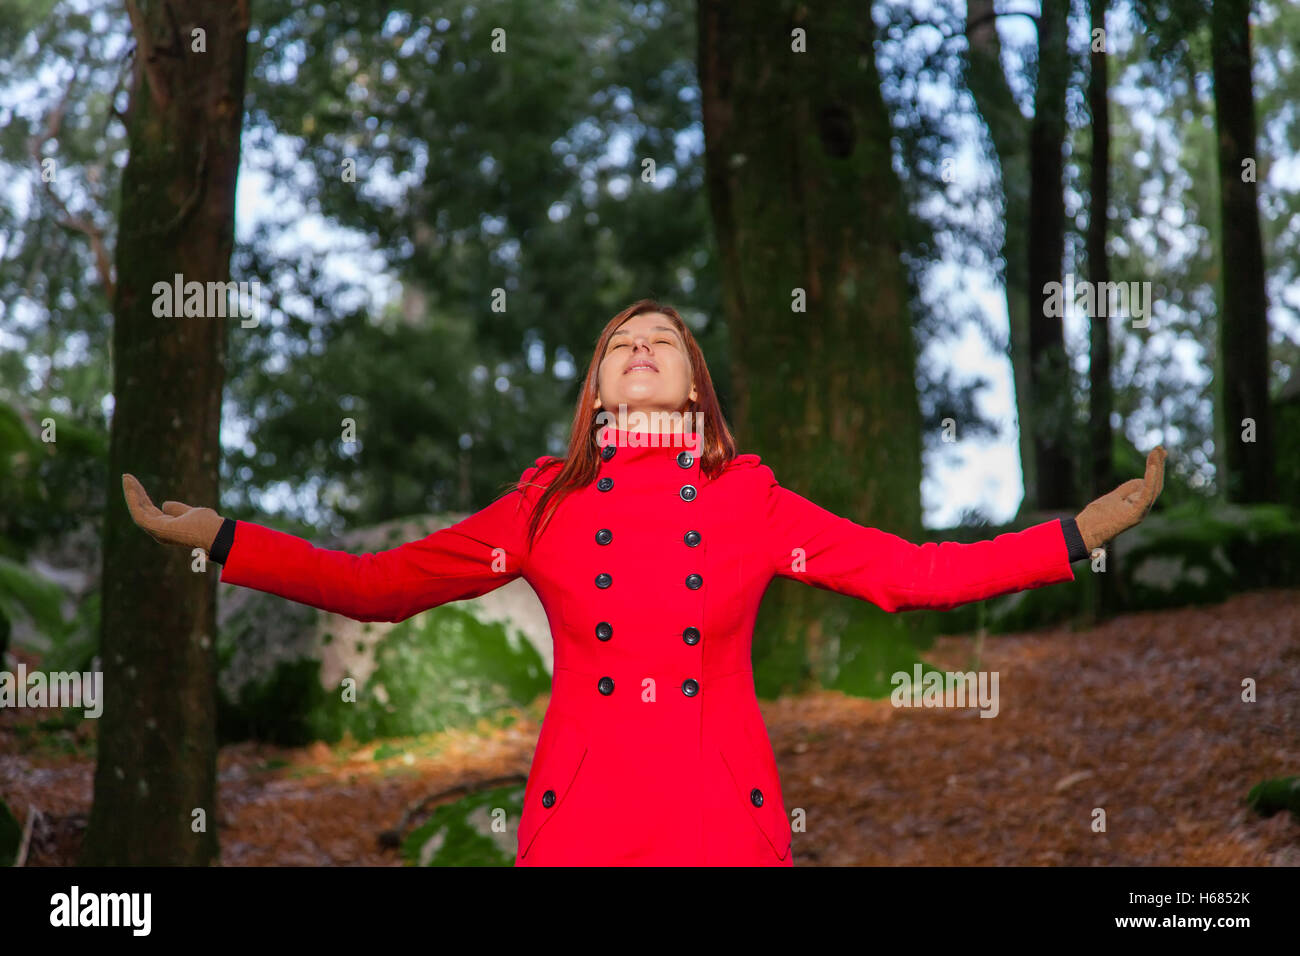 Woman enjoying the warmth of the winter sunlight on a forest wearing a red overcoat Stock Photo